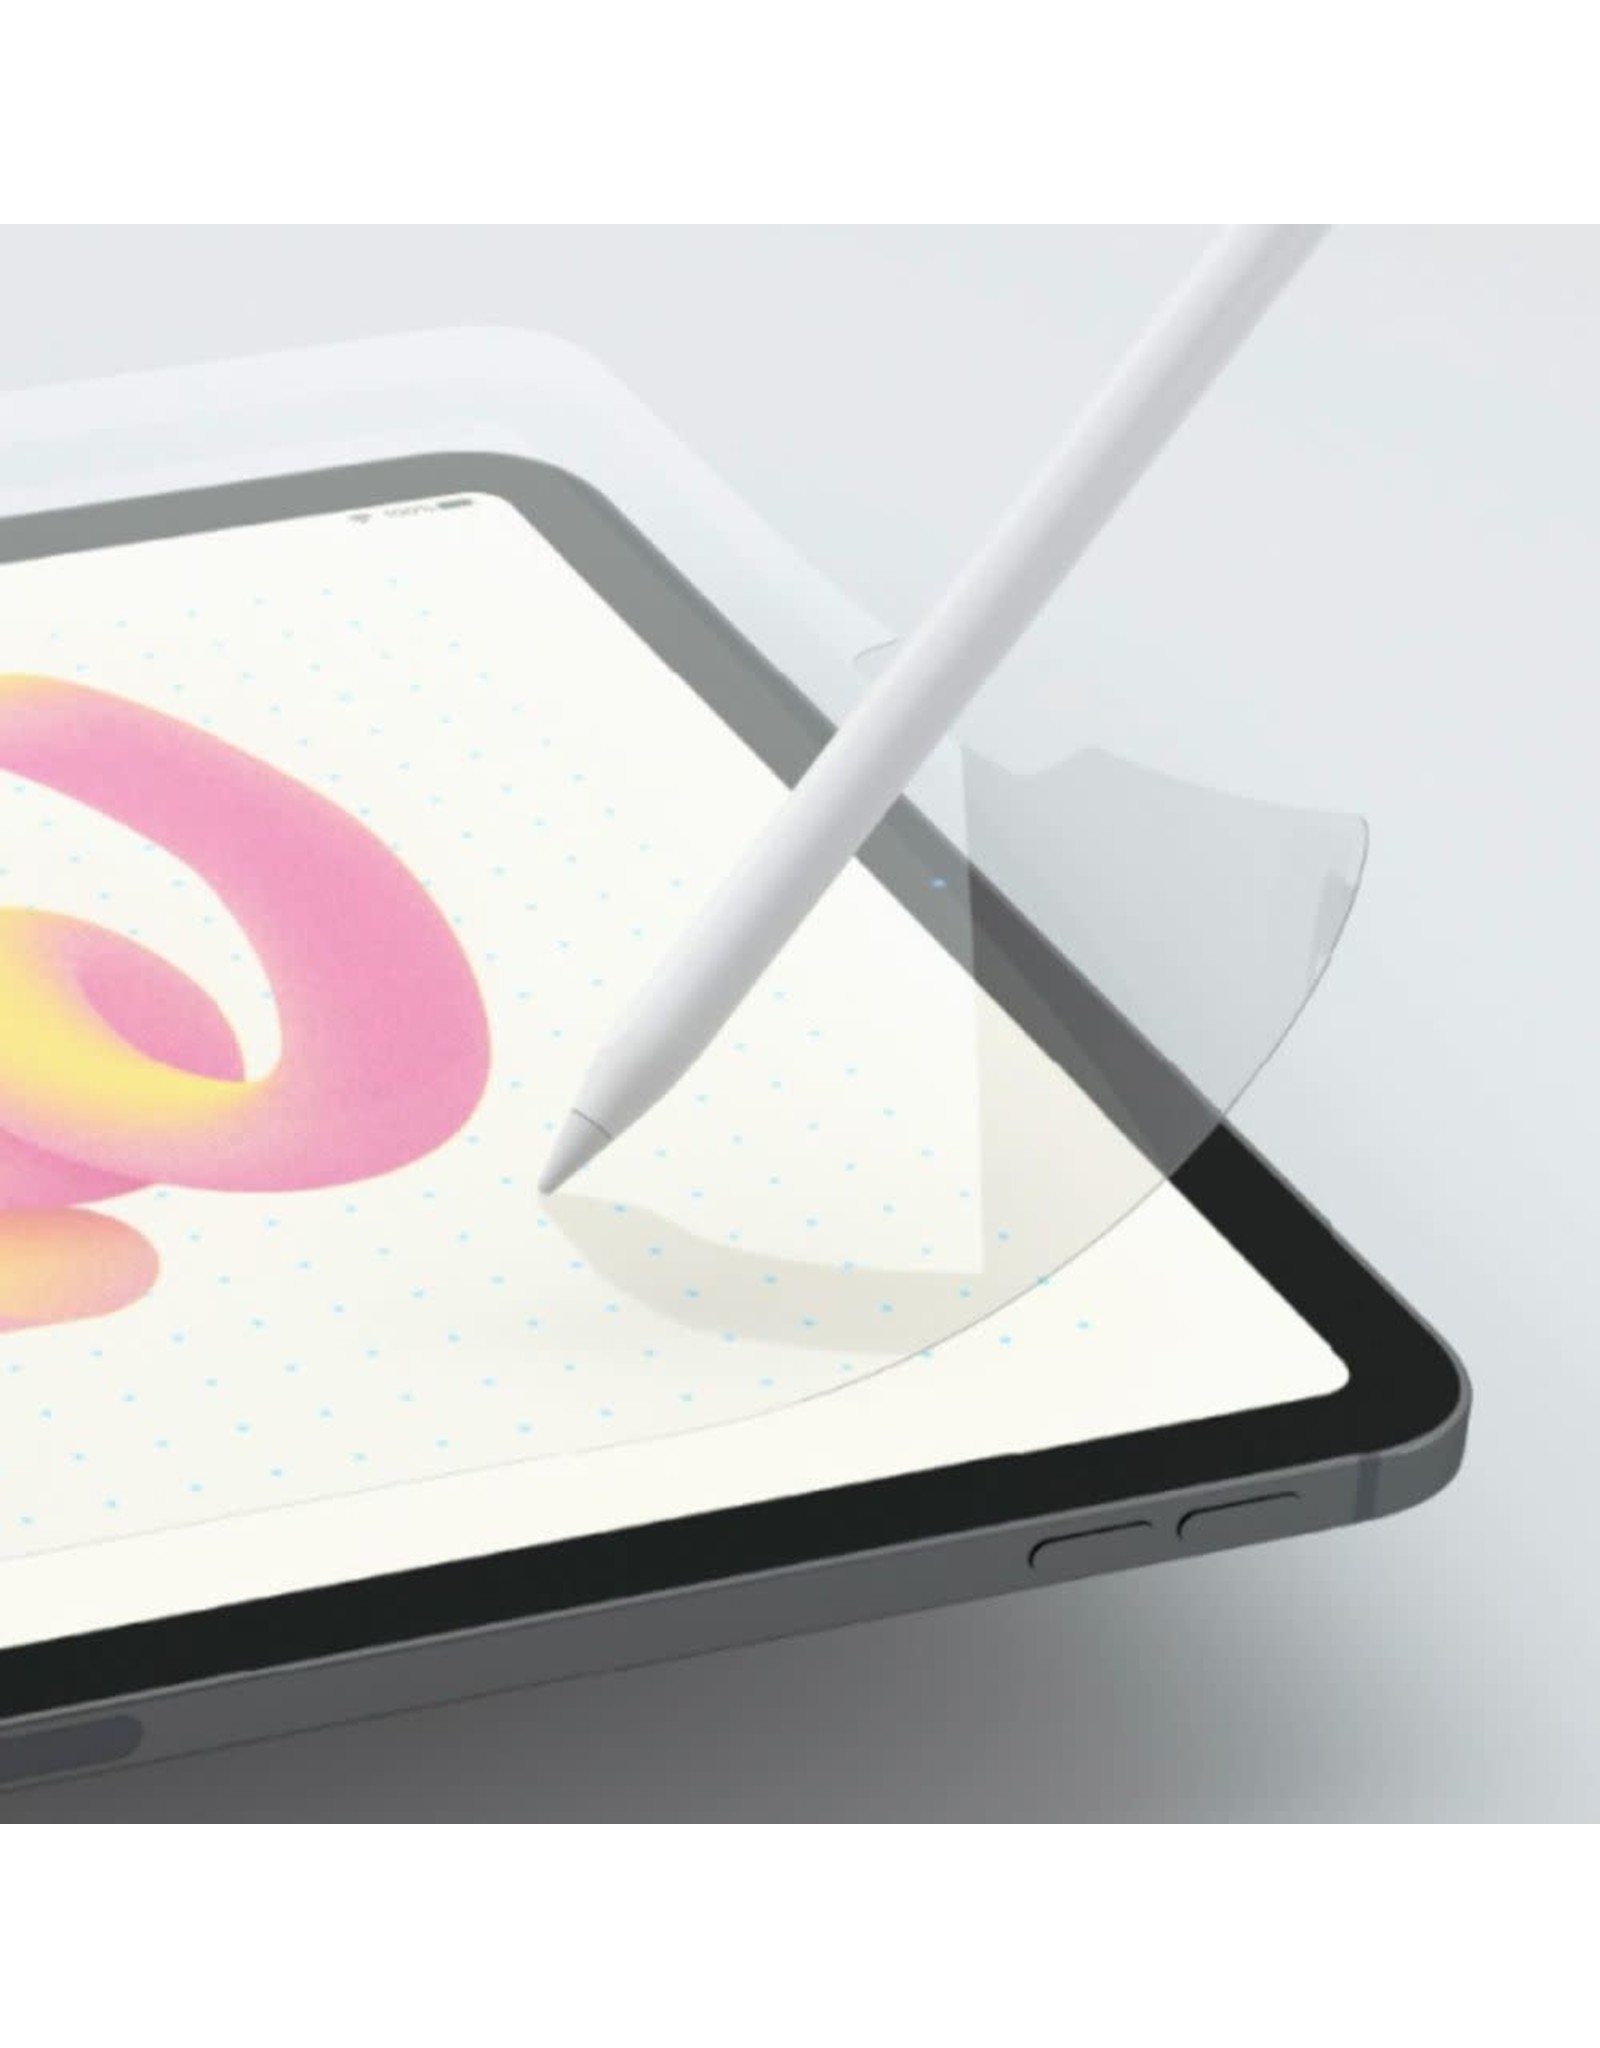 Paperlike Paperlike Screen Protector (v2.1) for iPad 10.9" (10th gen) for Writing & Drawing (x2 pack)